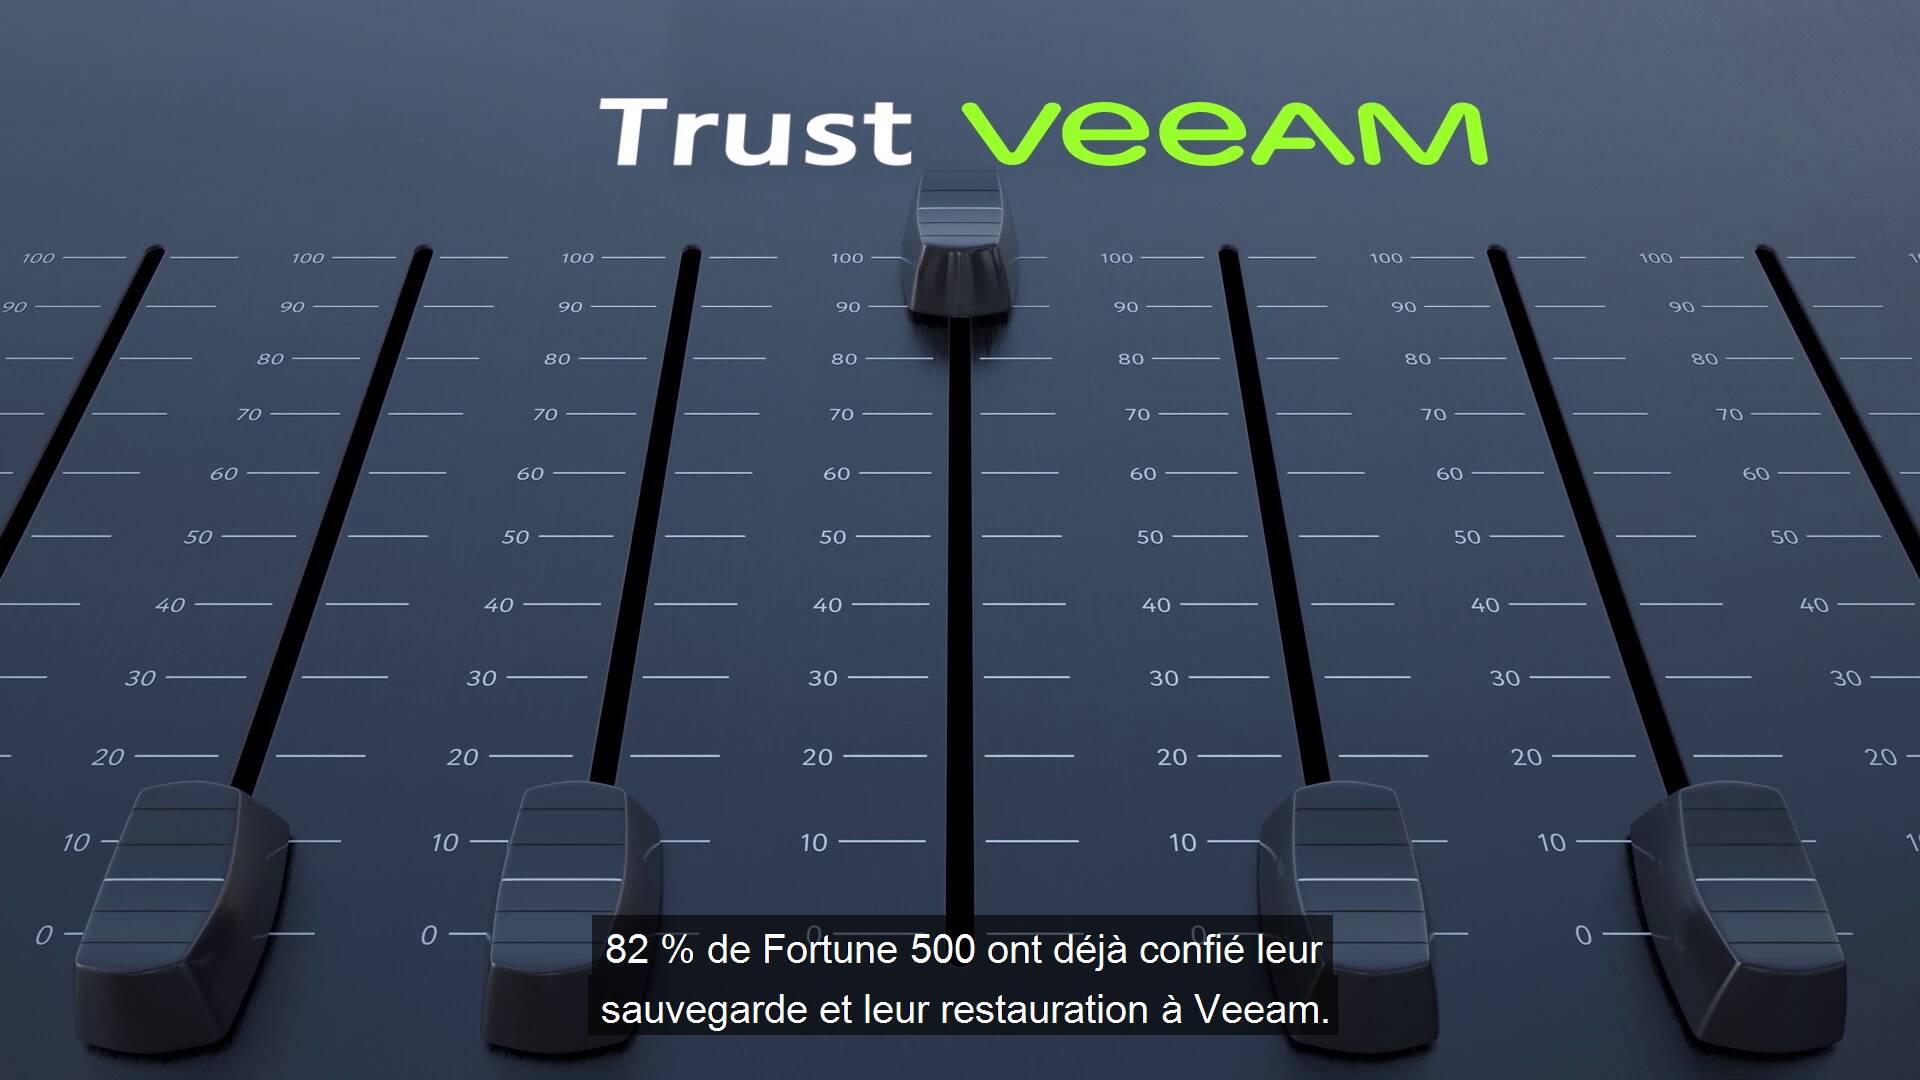 FR Corporate Messaging Why Veeam - Feb 2020